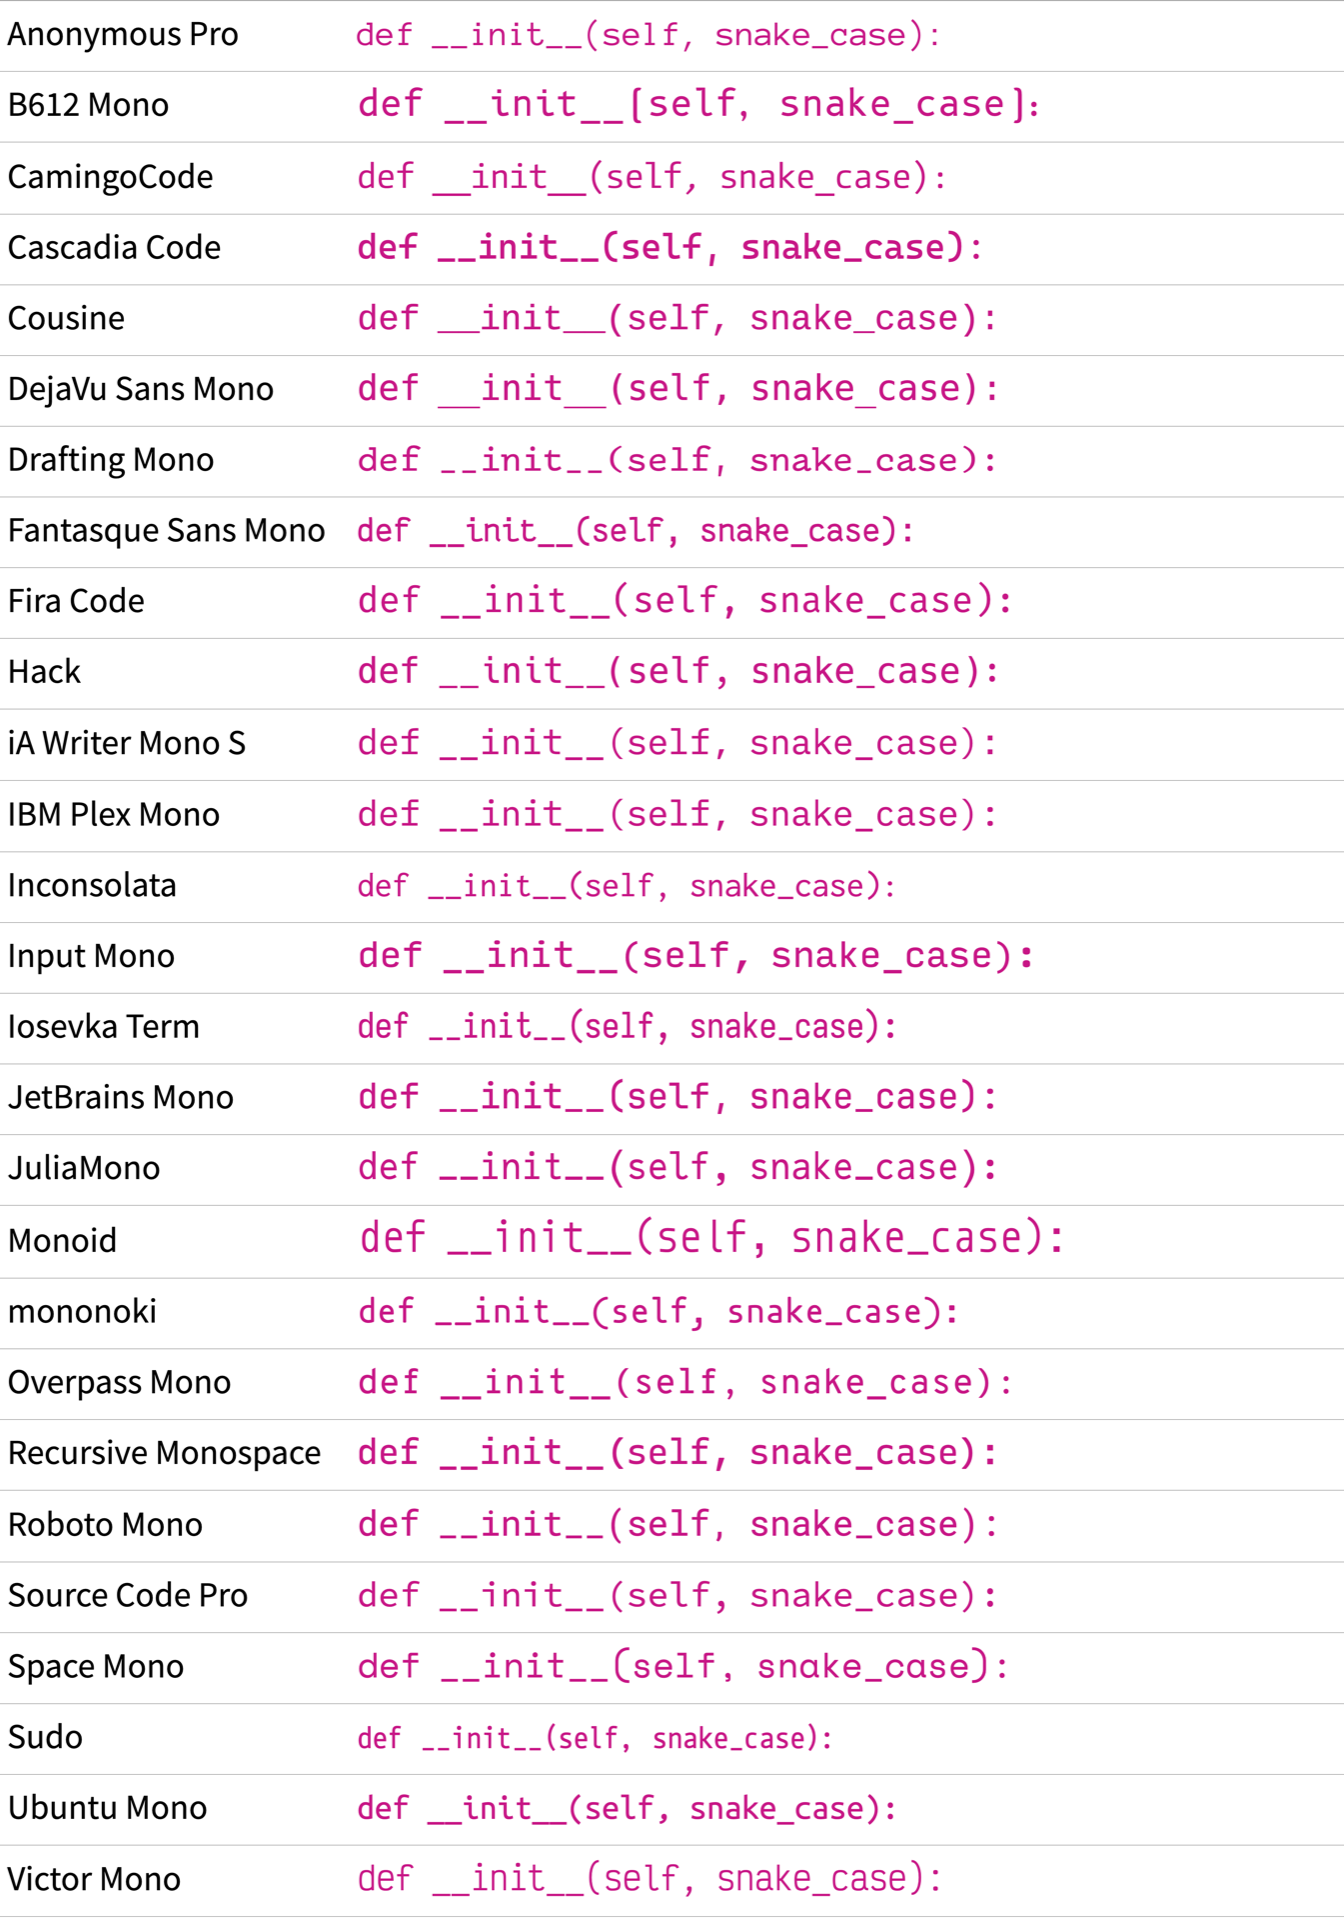 Screenshot of all fonts showing the string "def __init__(self, snake_case):"